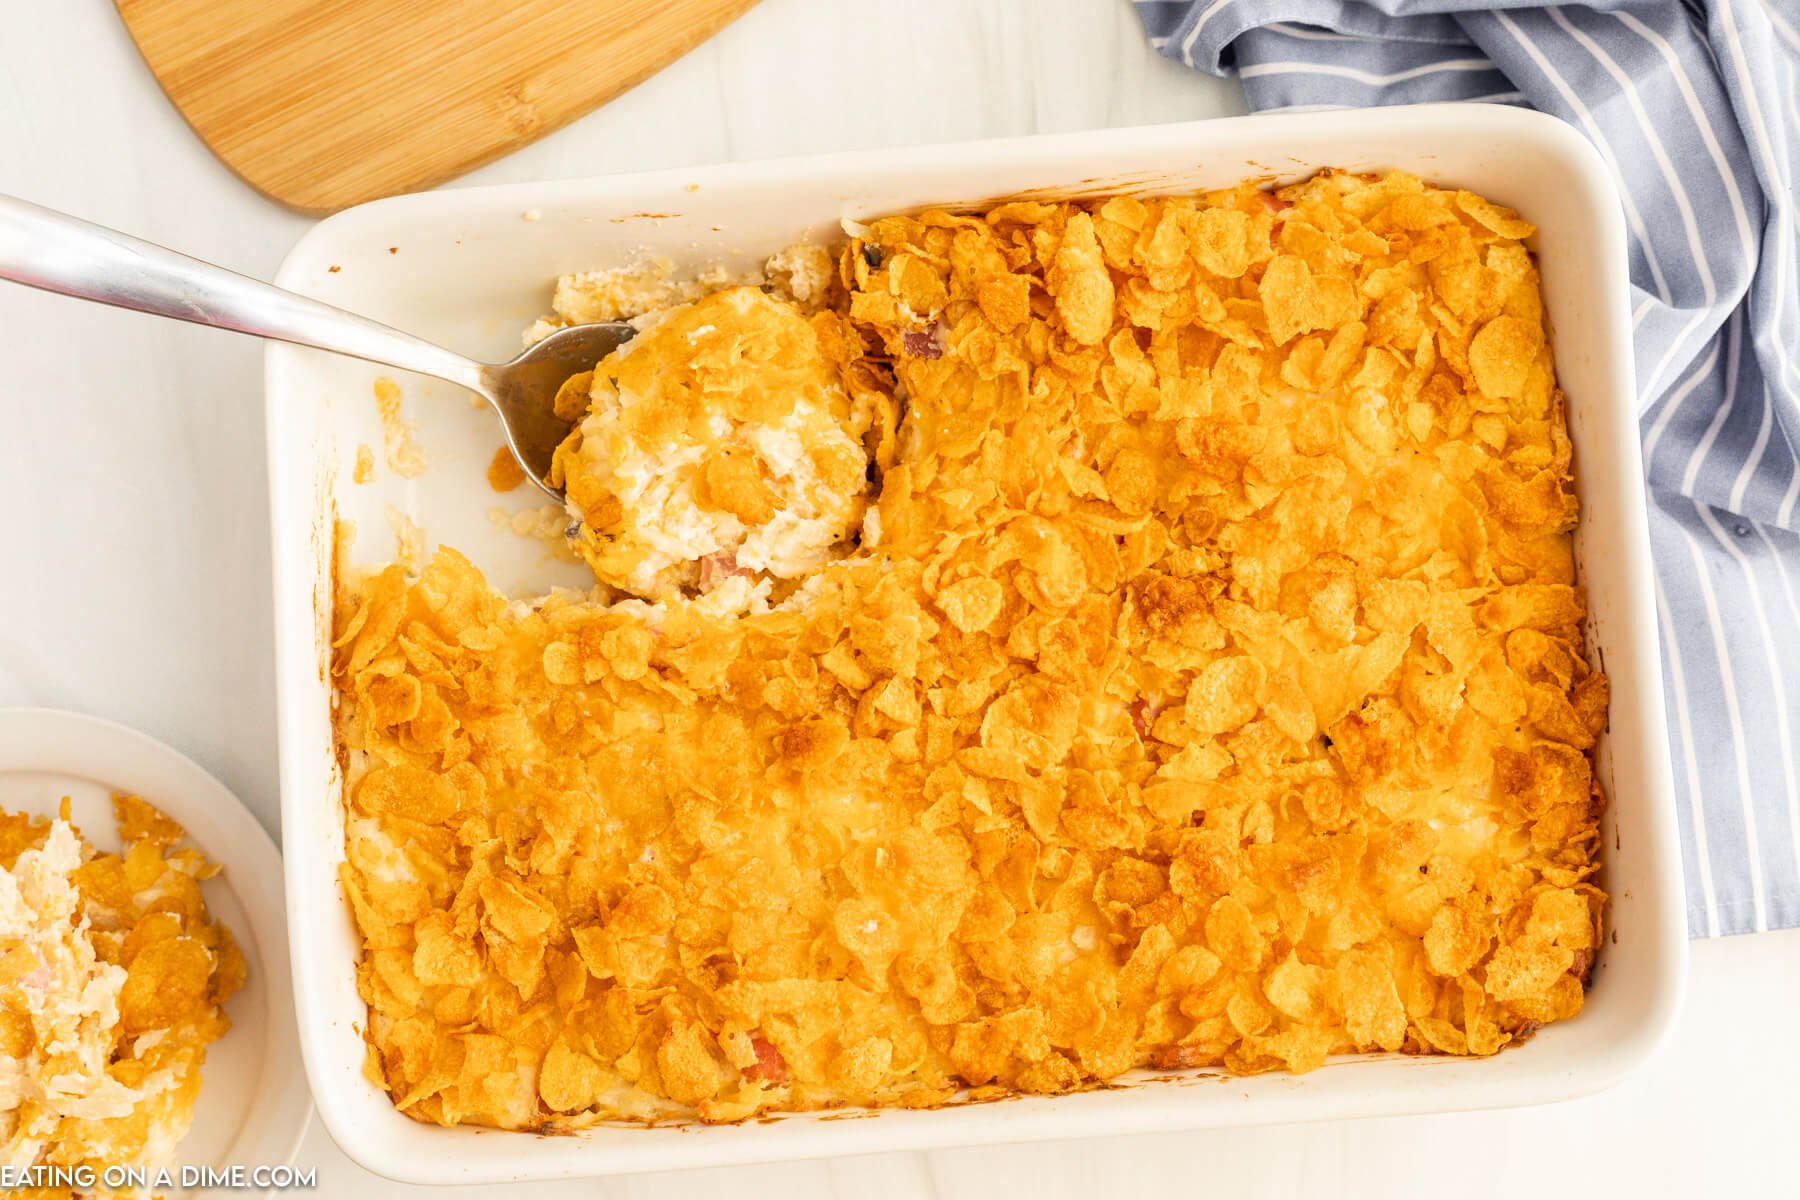 Funeral potatoes in a baking dish with a spoon